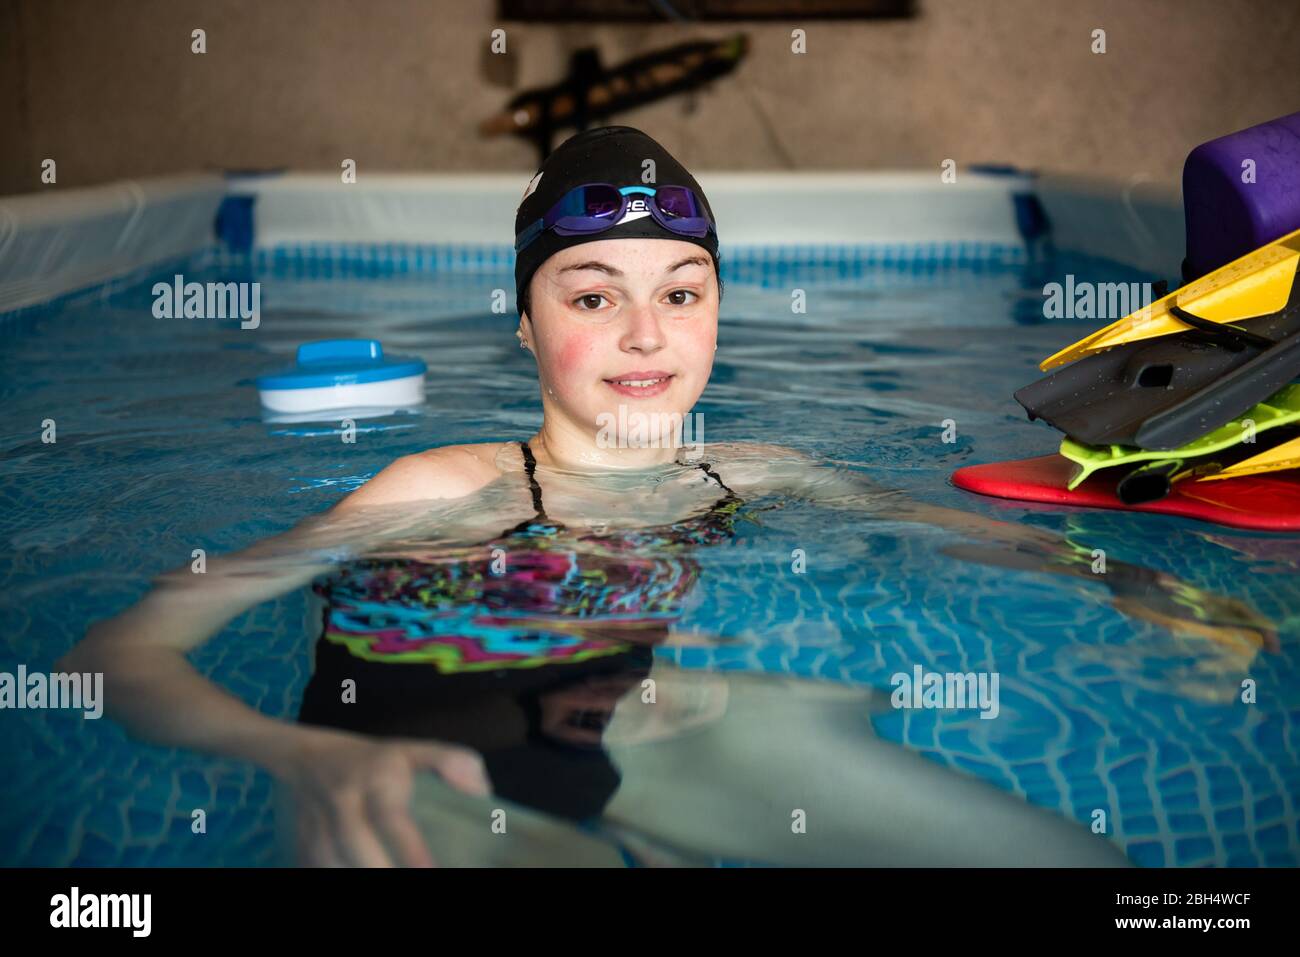 Slovenian swimmer, Katja Fain poses for a photo after training in a swimming pool in her garage.  Due to the Covid-19 pandemic public swimming pools and other sports facilities are closed. Stock Photo